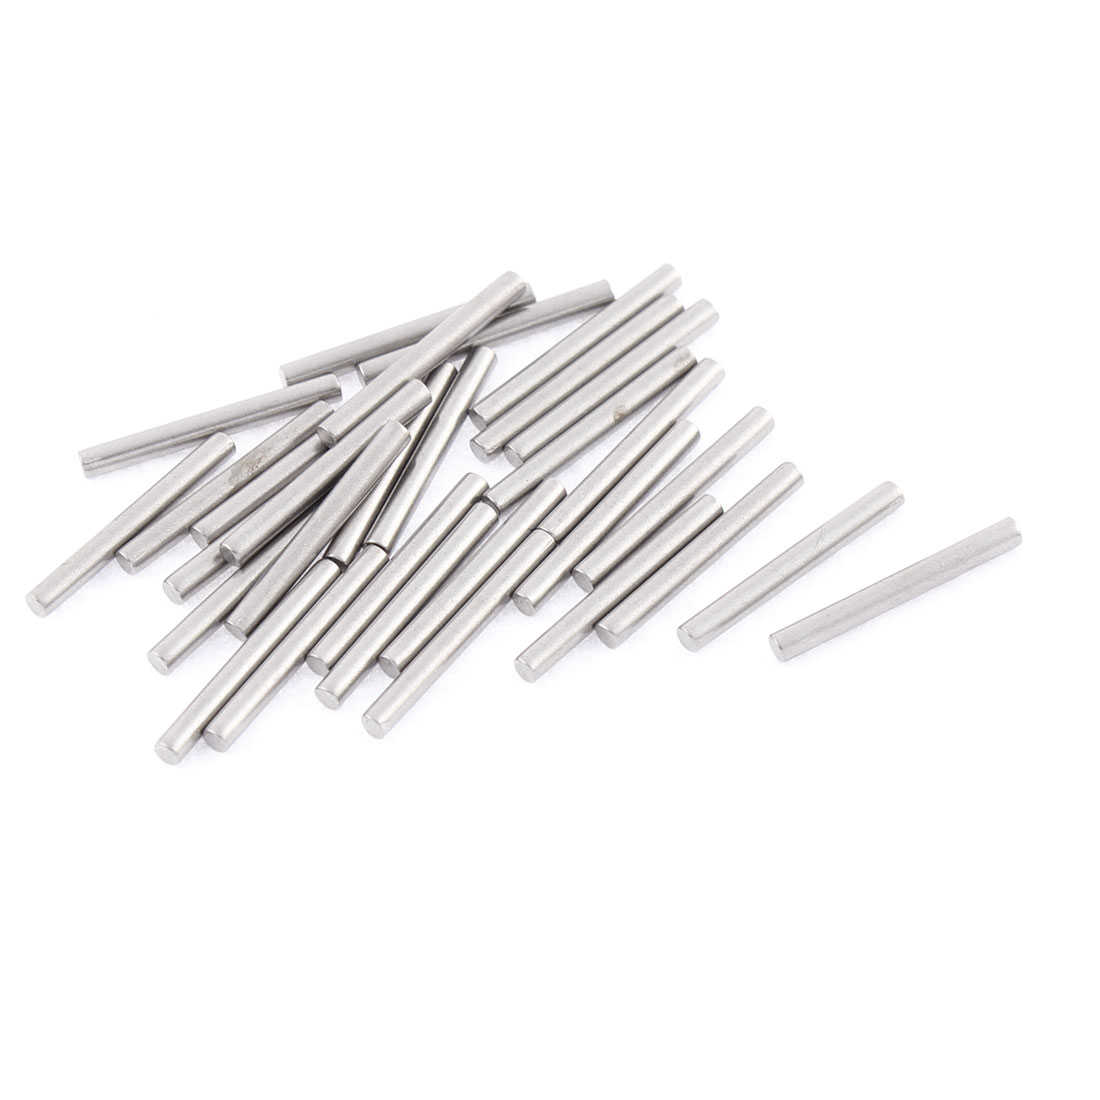 M2x18mm Stainless Steel Straight Retaining Dowel Pins Rod Fasten Elements 30 Pcs